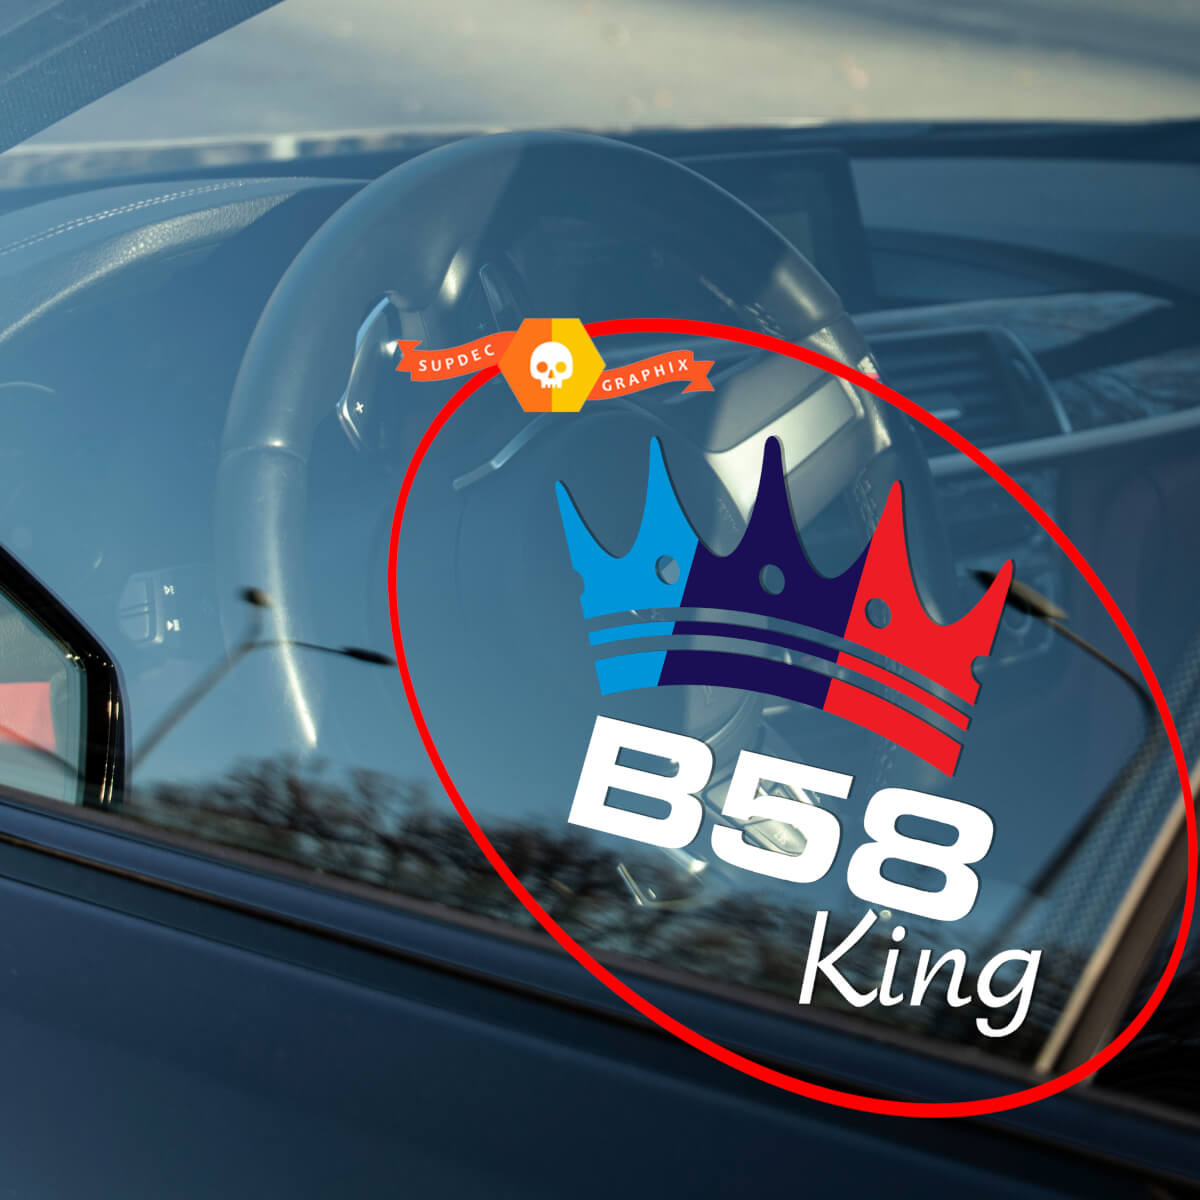 BMW B58 KING decal sticker for window interior exterior fit to 340 440 240 140 540 X3 X4 X5 X6
